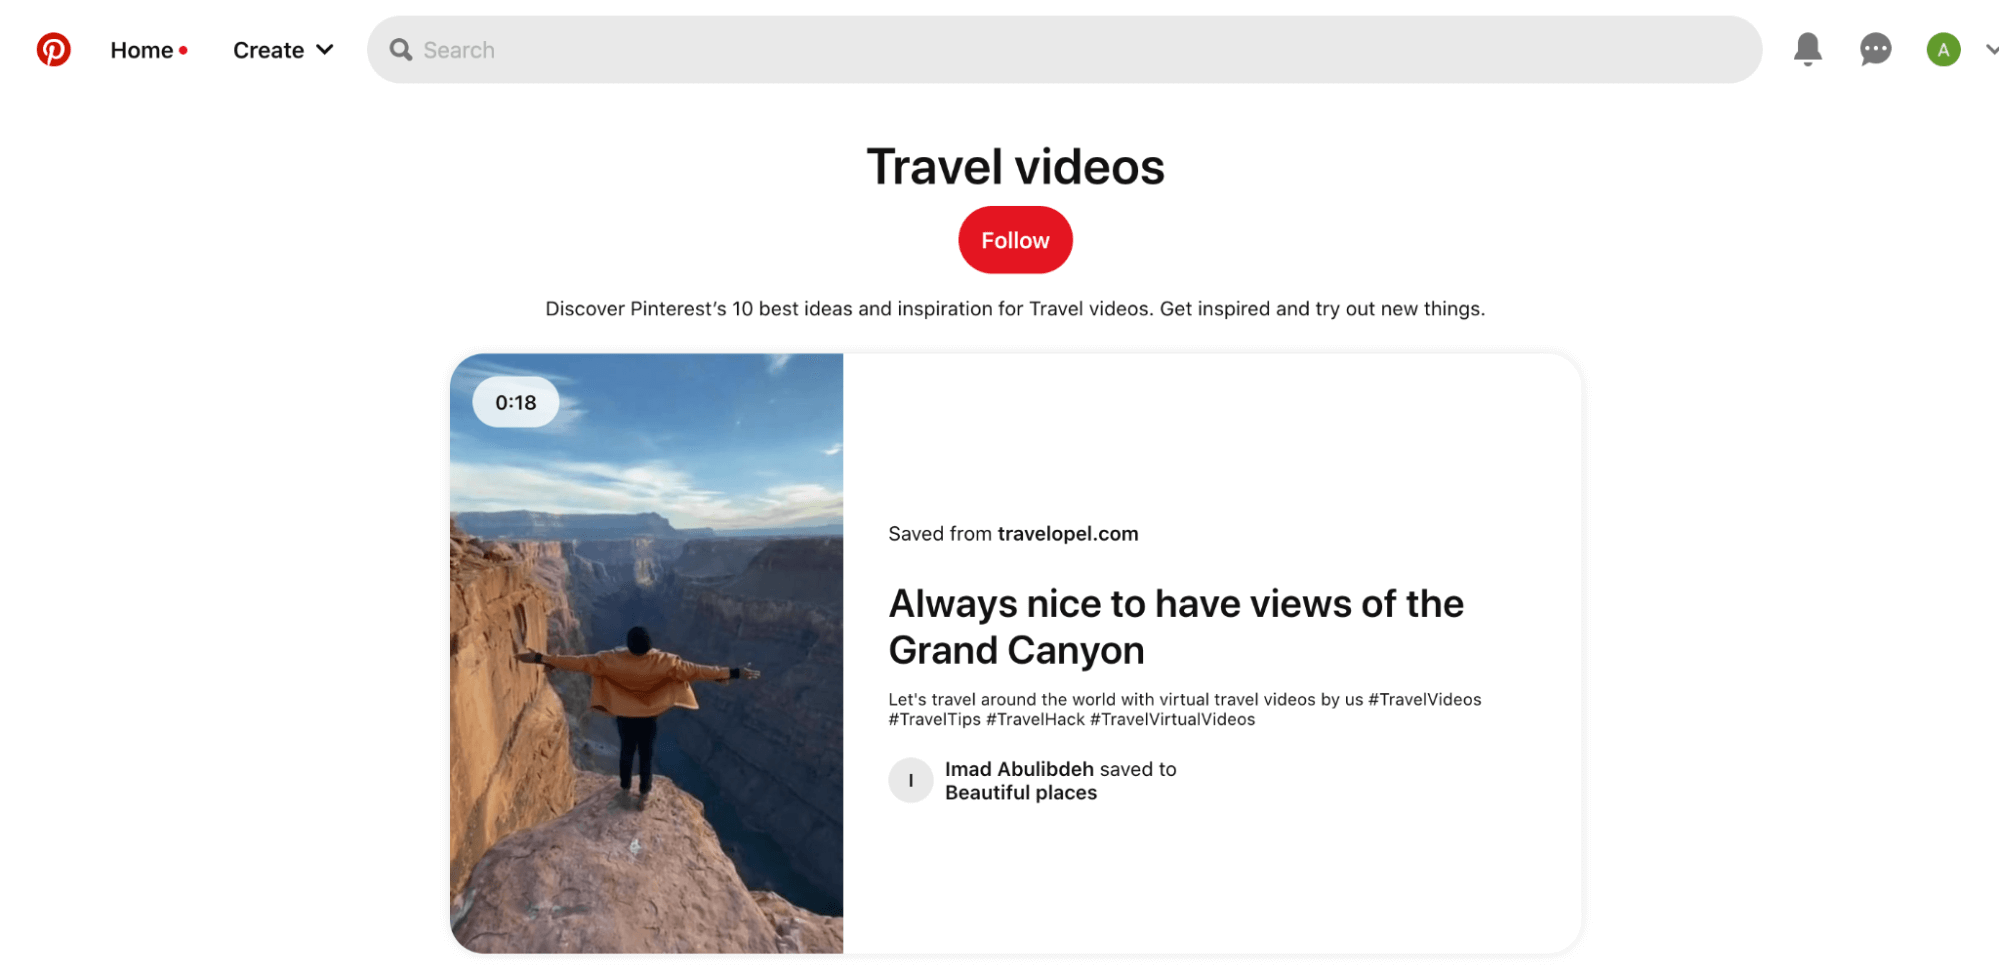 A screenshot of the Travel videos section on Pinterest